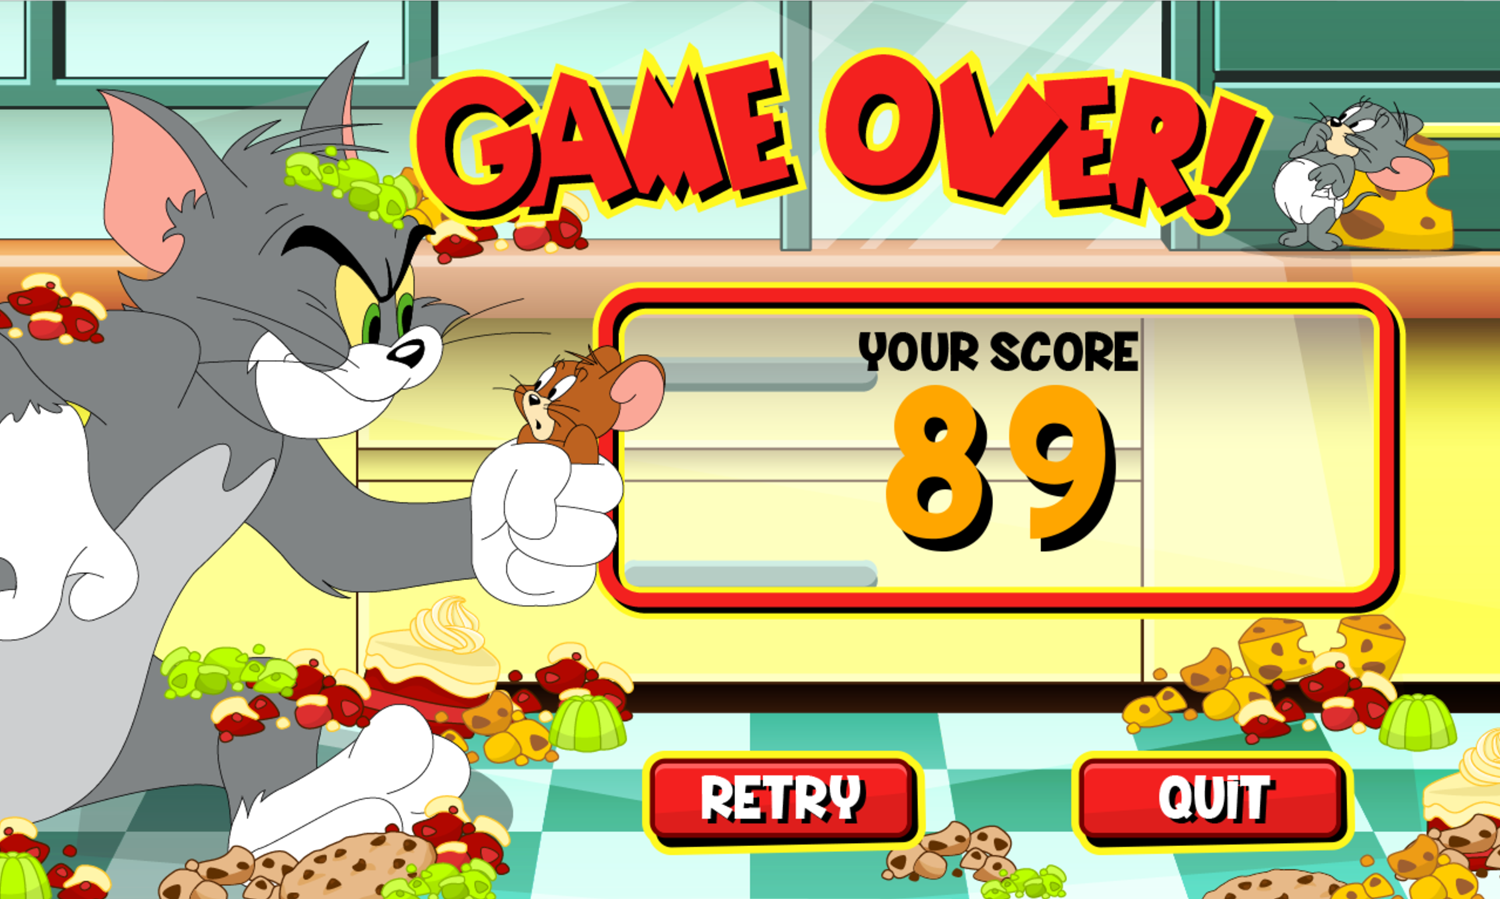 Tom and Jerry Bandit Munchers Game Over Screenshot.